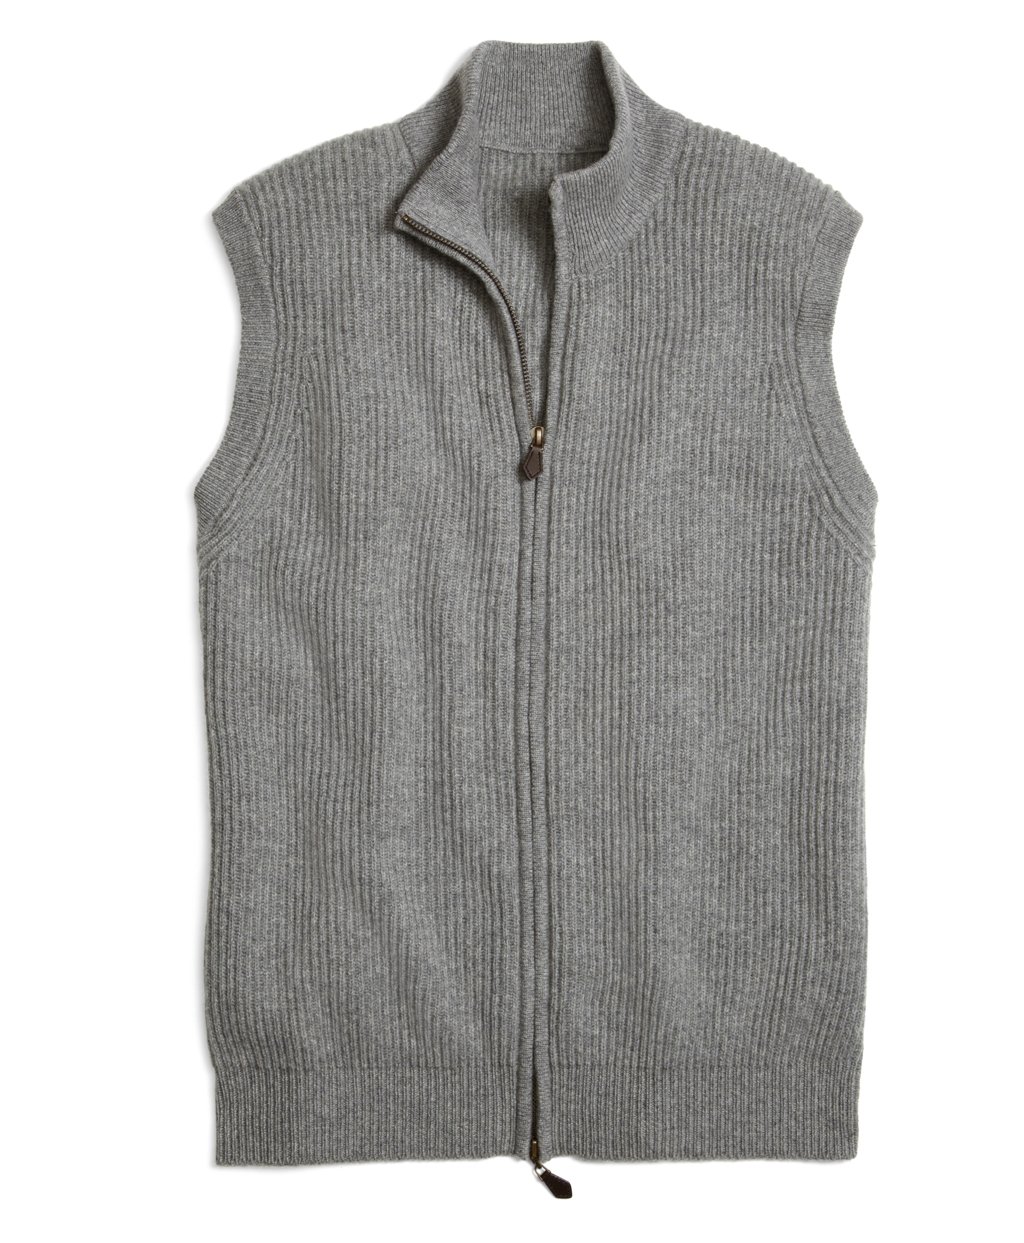 Lyst - Brooks Brothers Cashmere Full-zip Vest in Gray for Men